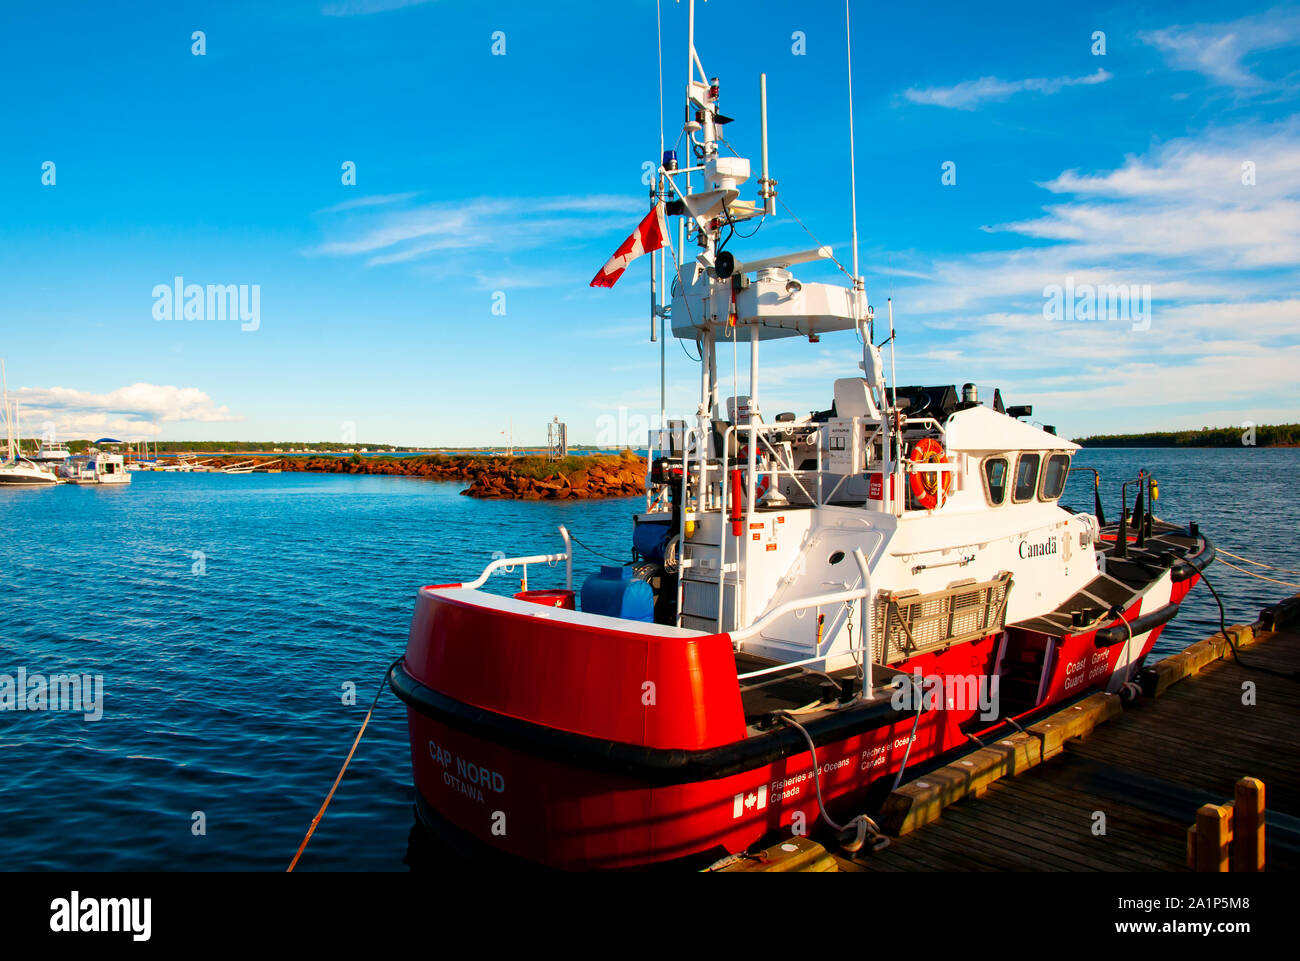 LOUISBOURG, CANADA - August 9, 2016: Fisheries & Oceans Canada government coast guard patrol boat Stock Photo